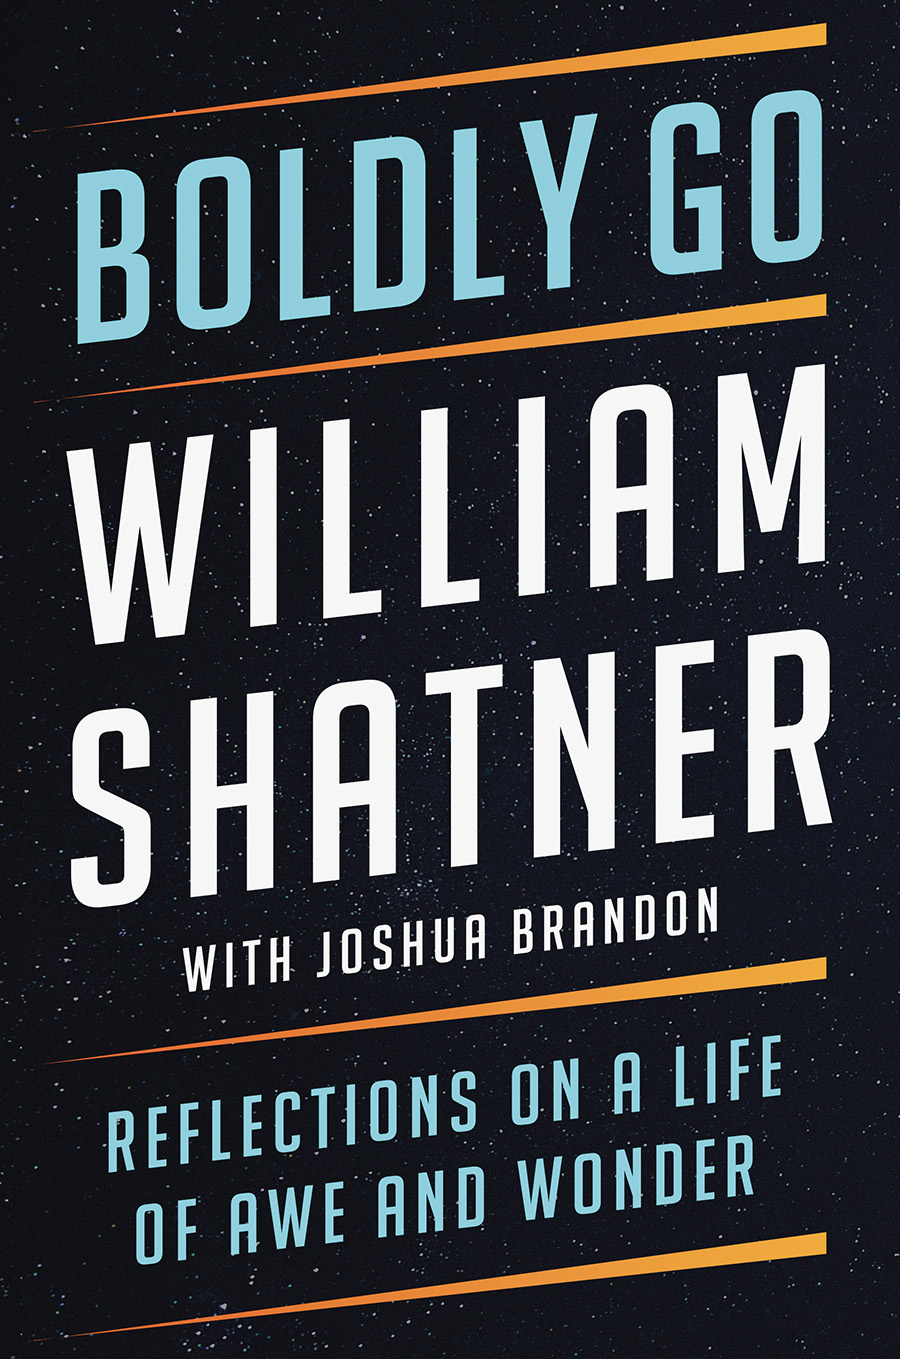 Boldly Go Reflections On A Life Of Awe And Wonder HC